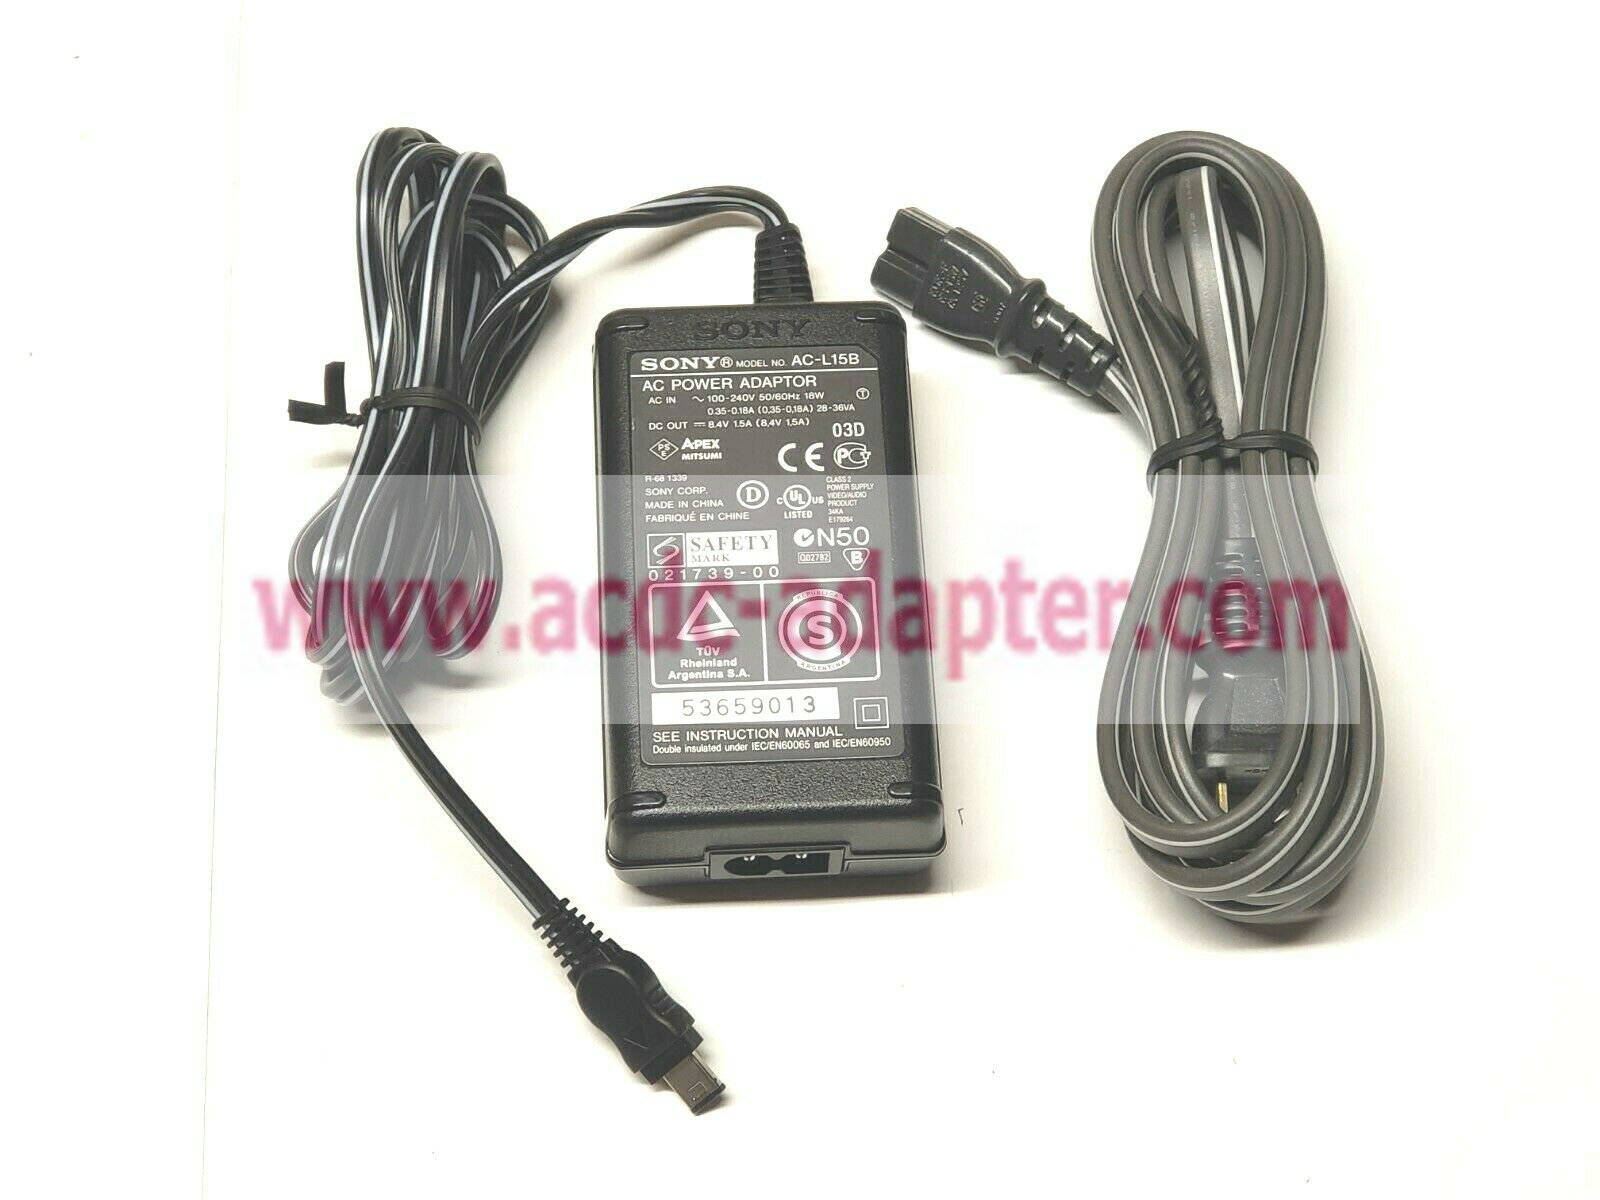 NEW Sony AC-L15B 8.4V 1.5A AC adapter for Handycam CCD-TRV128 Camcorder power supp